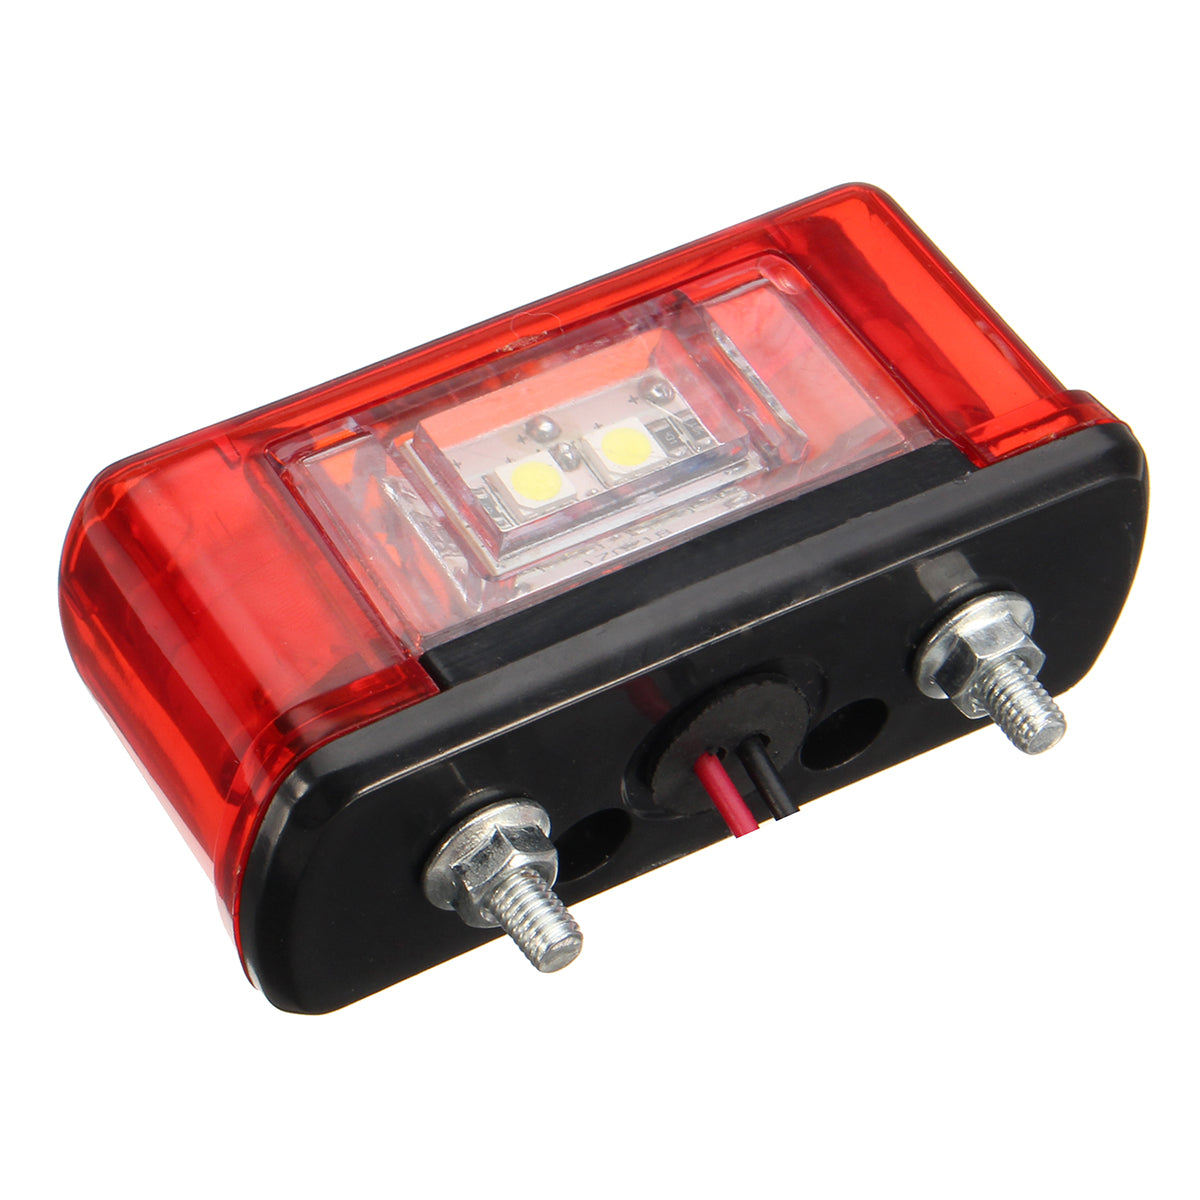 Chocolate 24V 4 SMD Red Car Rear Number License Plate Lights Lamp for Truck Trailer Lorry